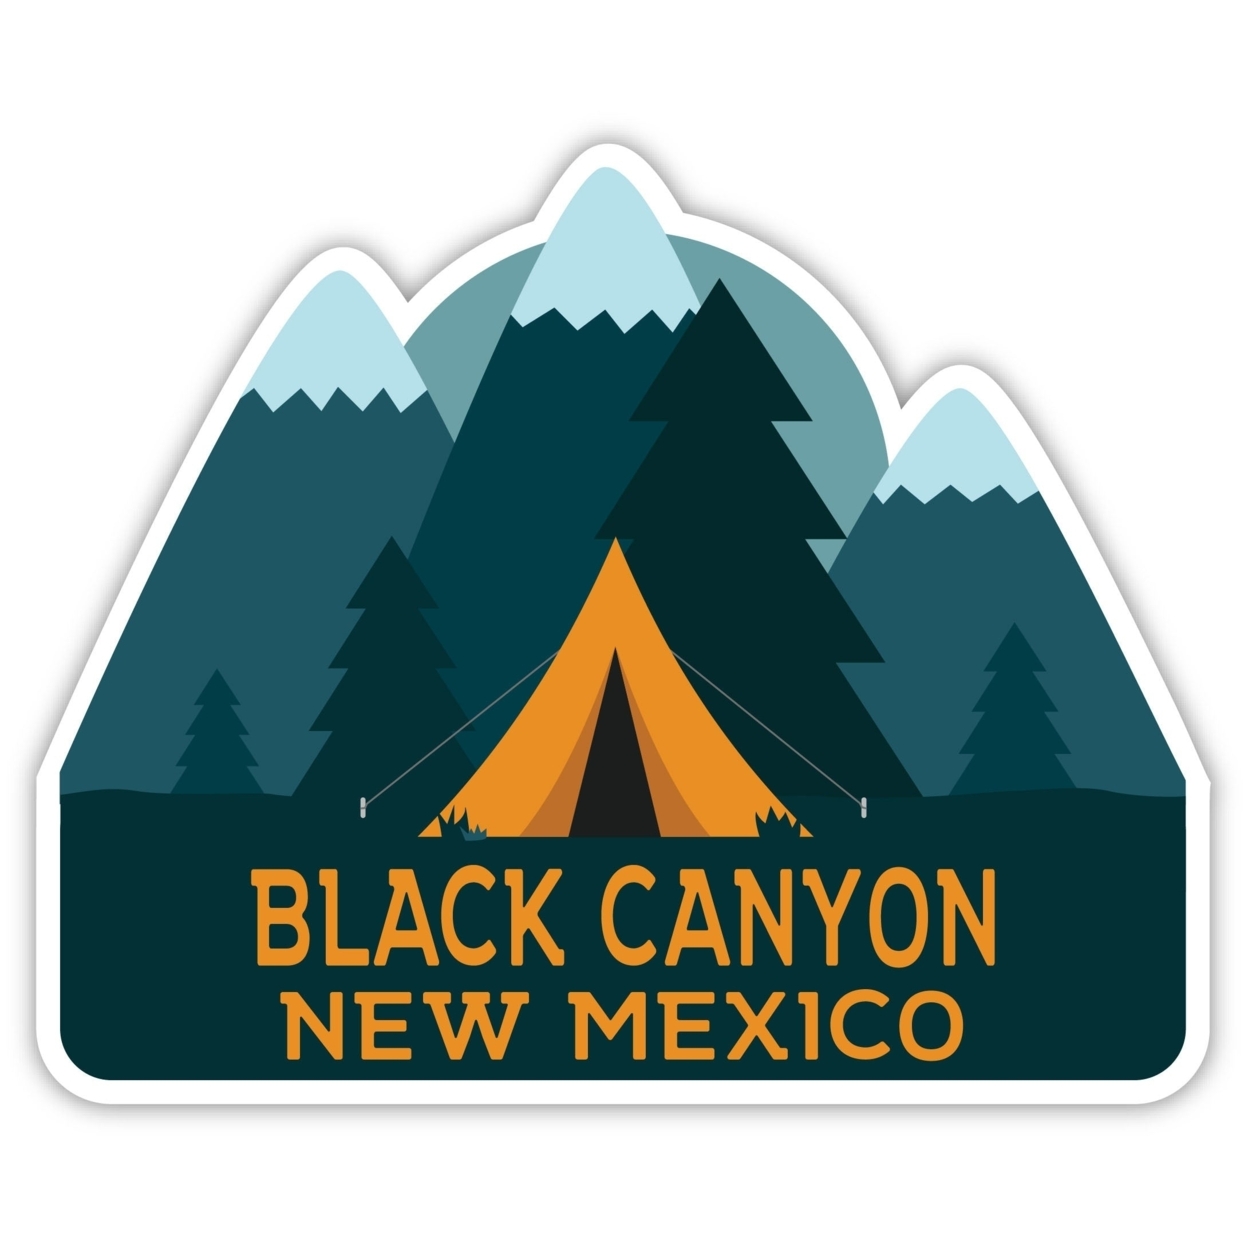 Black Canyon New Mexico Souvenir Decorative Stickers (Choose Theme And Size) - 4-Pack, 12-Inch, Tent